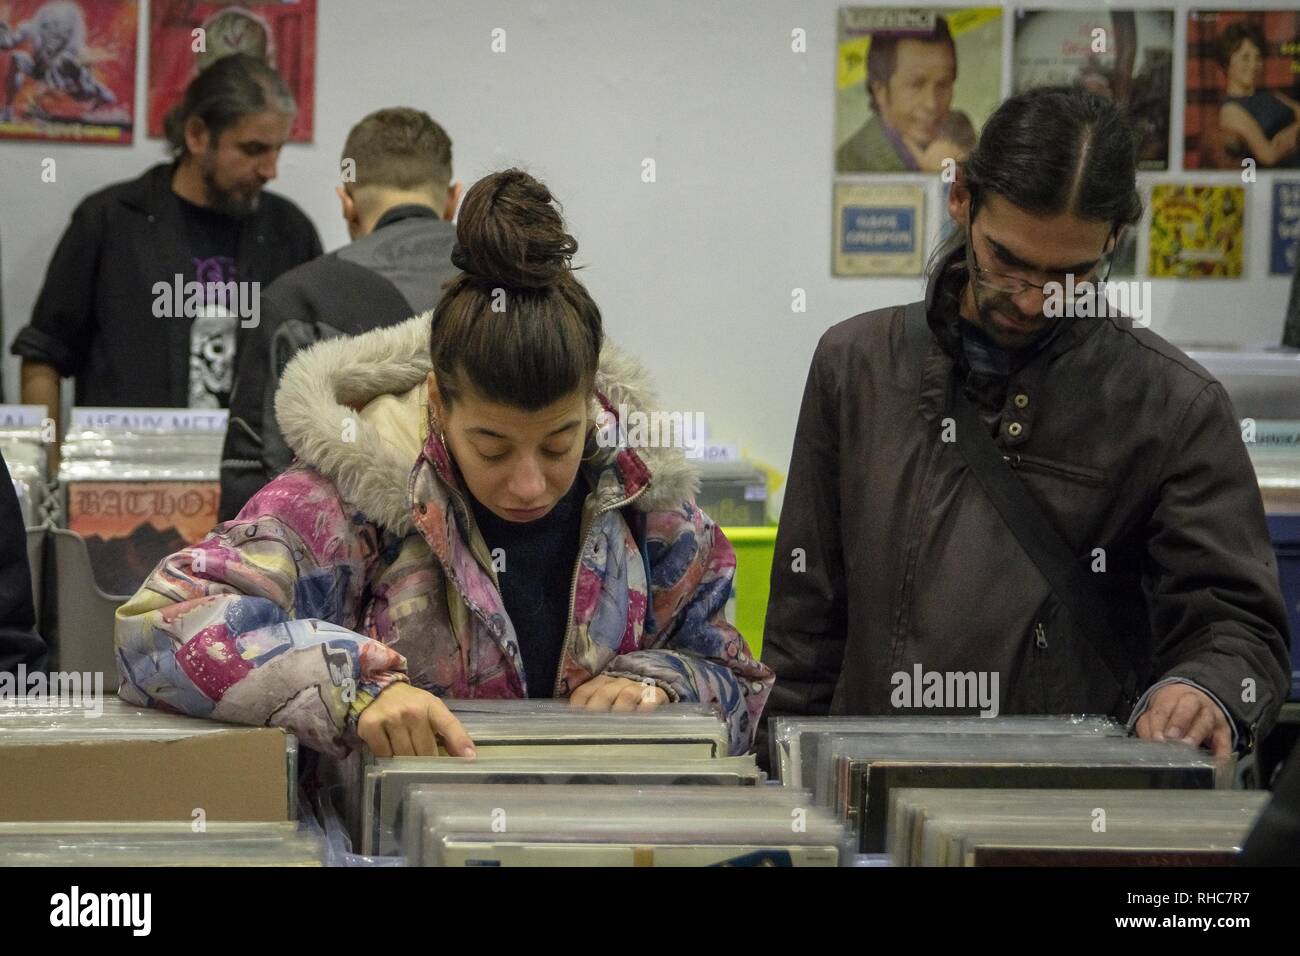 People seen searching for vinyl during the event. Vinyl Market is a festival with many new disc collections, many collectibles and new releases. It also has collections of other music themes, CDs, Posters, music magazines, books and many other related exhibits. Stock Photo